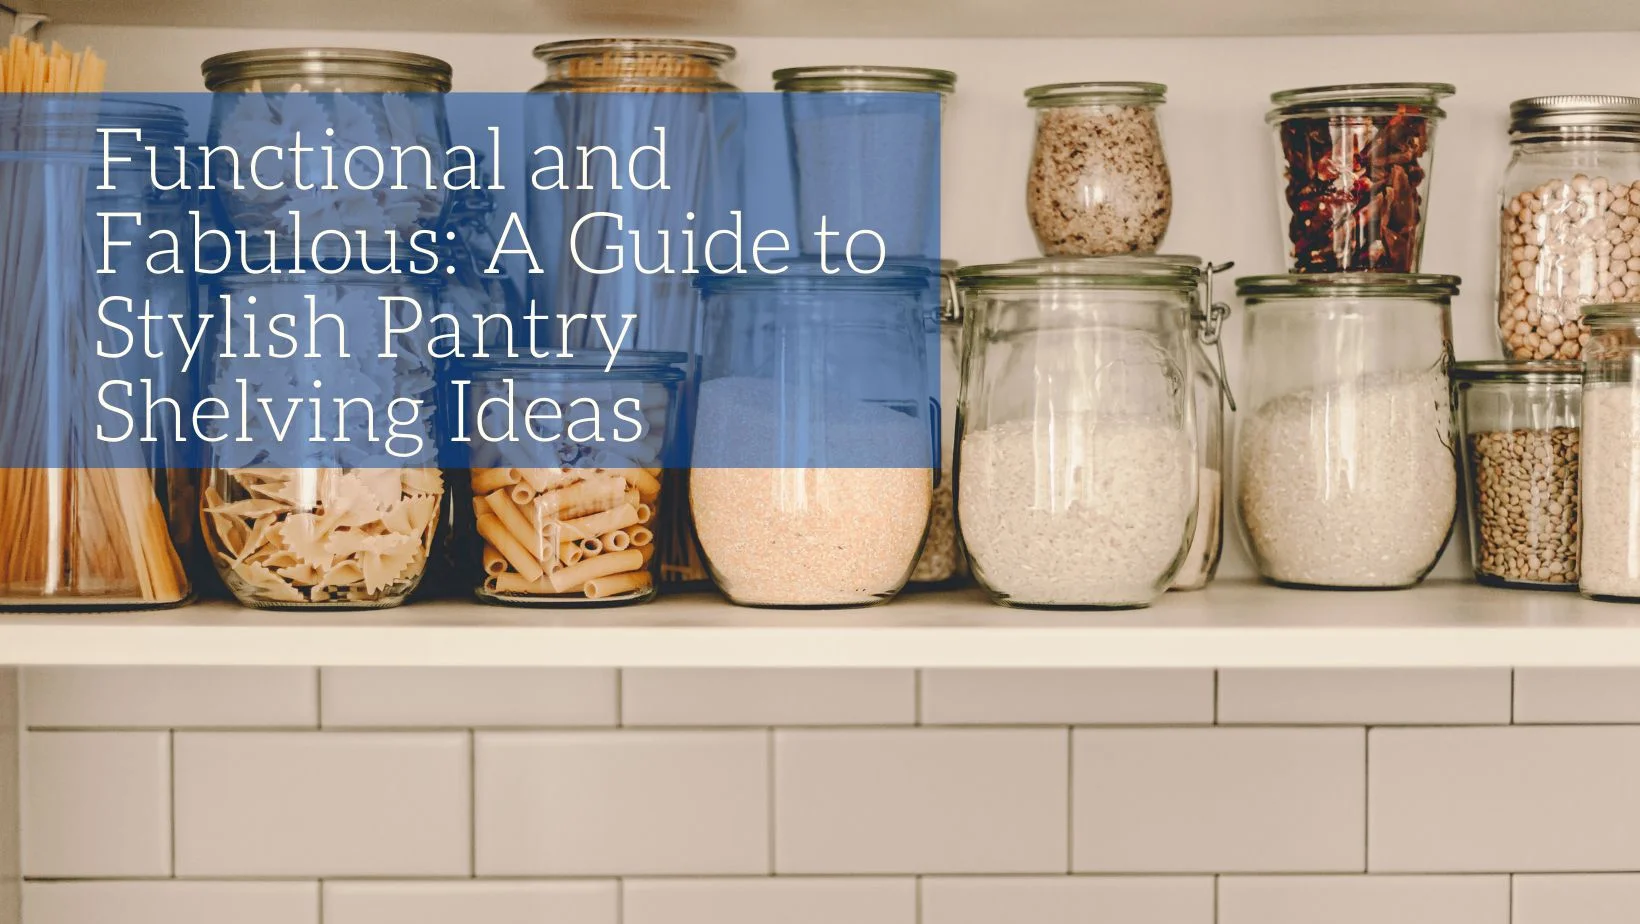 Functional and Fabulous: A Guide to Stylish Pantry Shelving Ideas